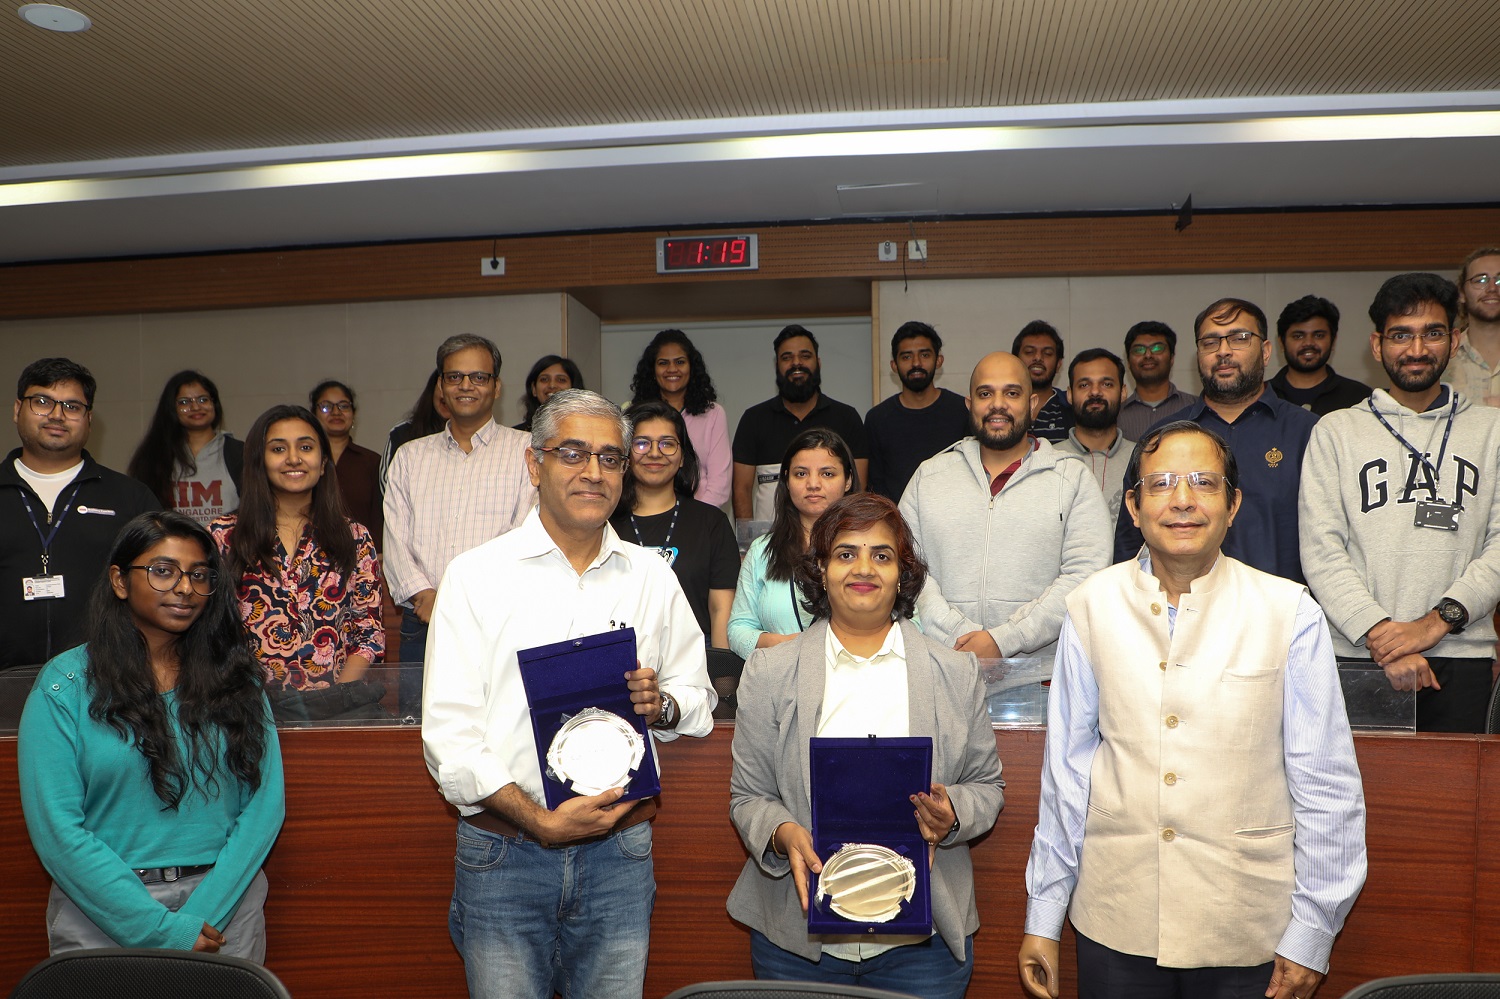 Global Engineering Director of Red Hat Shefali Bansal and CEO of the Jewellery division of Titan Ajoy Chawla discussed ‘Leadership in the Digital Era’ at IIMB on November 25, 2022. Prof. Gopal Mahapatra moderated the discussion.